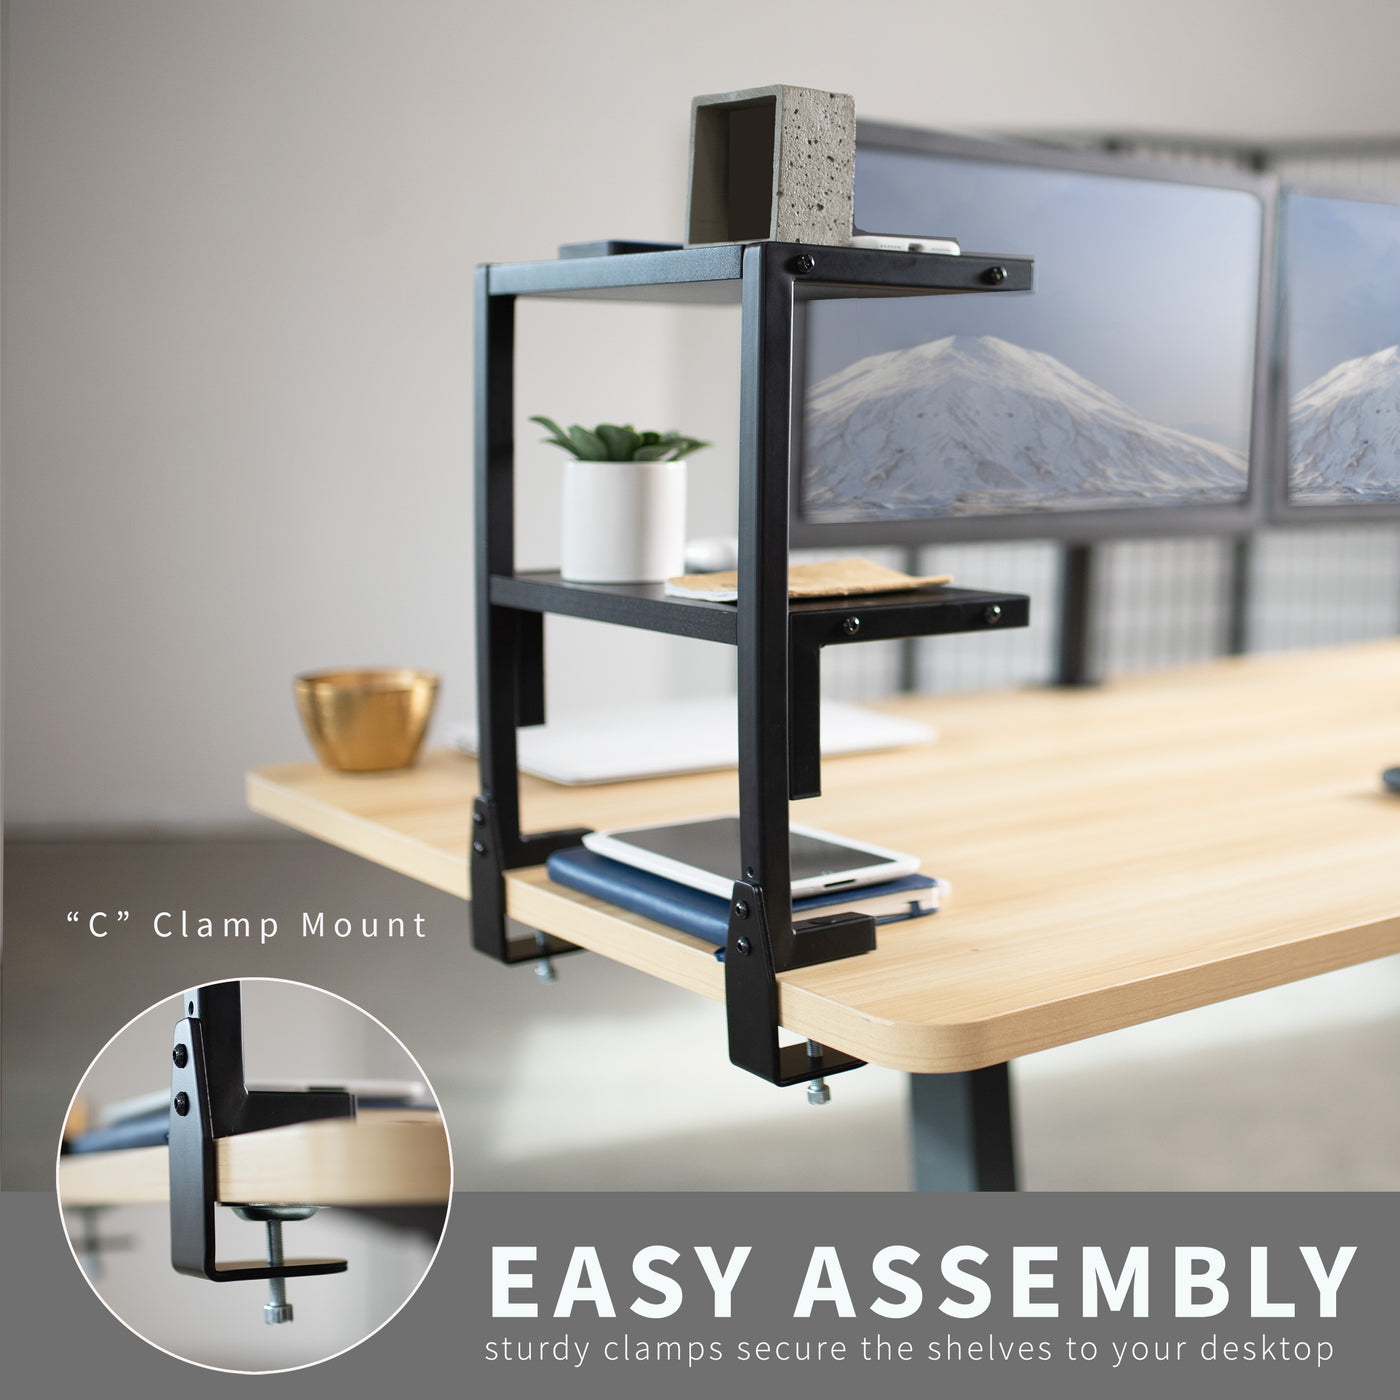 Assembly made easy with dual C-clamp mounting to secure your new desk shelf.